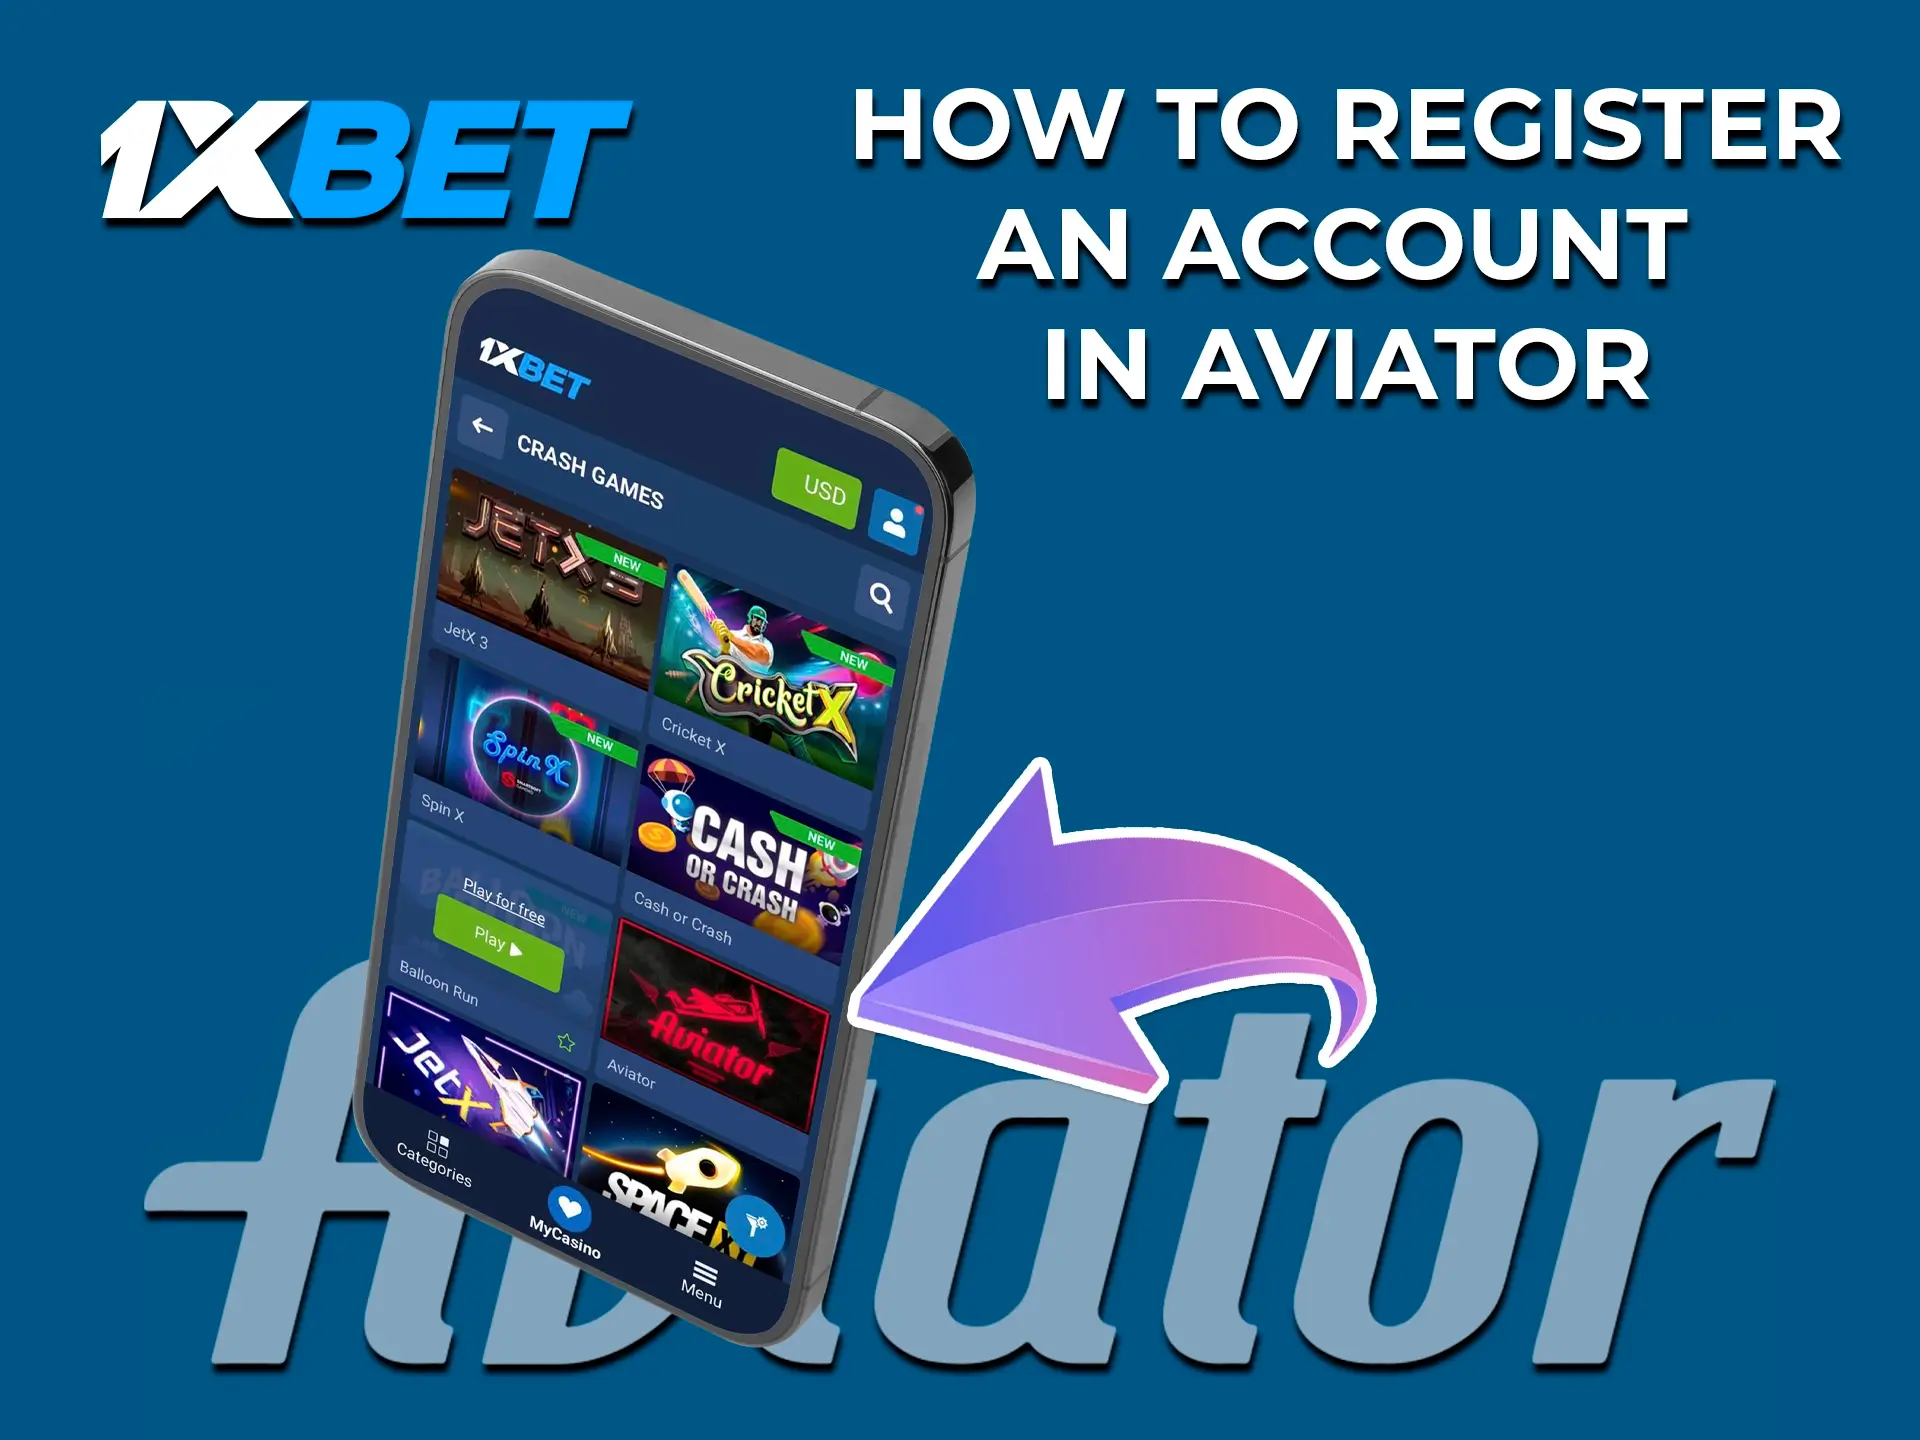 Register your account with 1xBet and start playing Aviator.